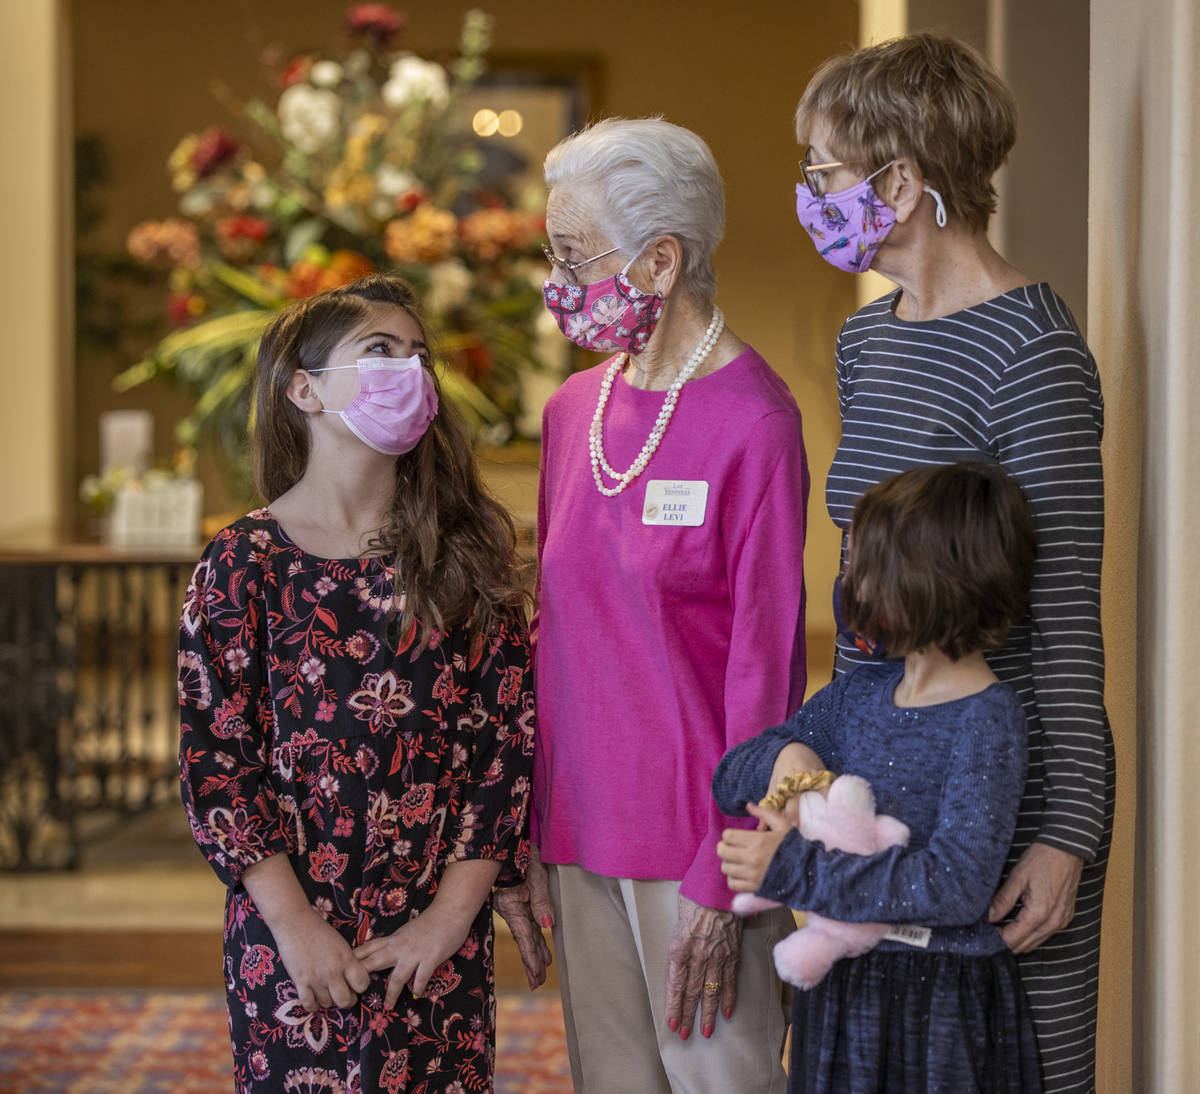 Hailey Cuthbert, 9, left, looks to her great grandmother Ellie Levi, 90, center, with her siste ...